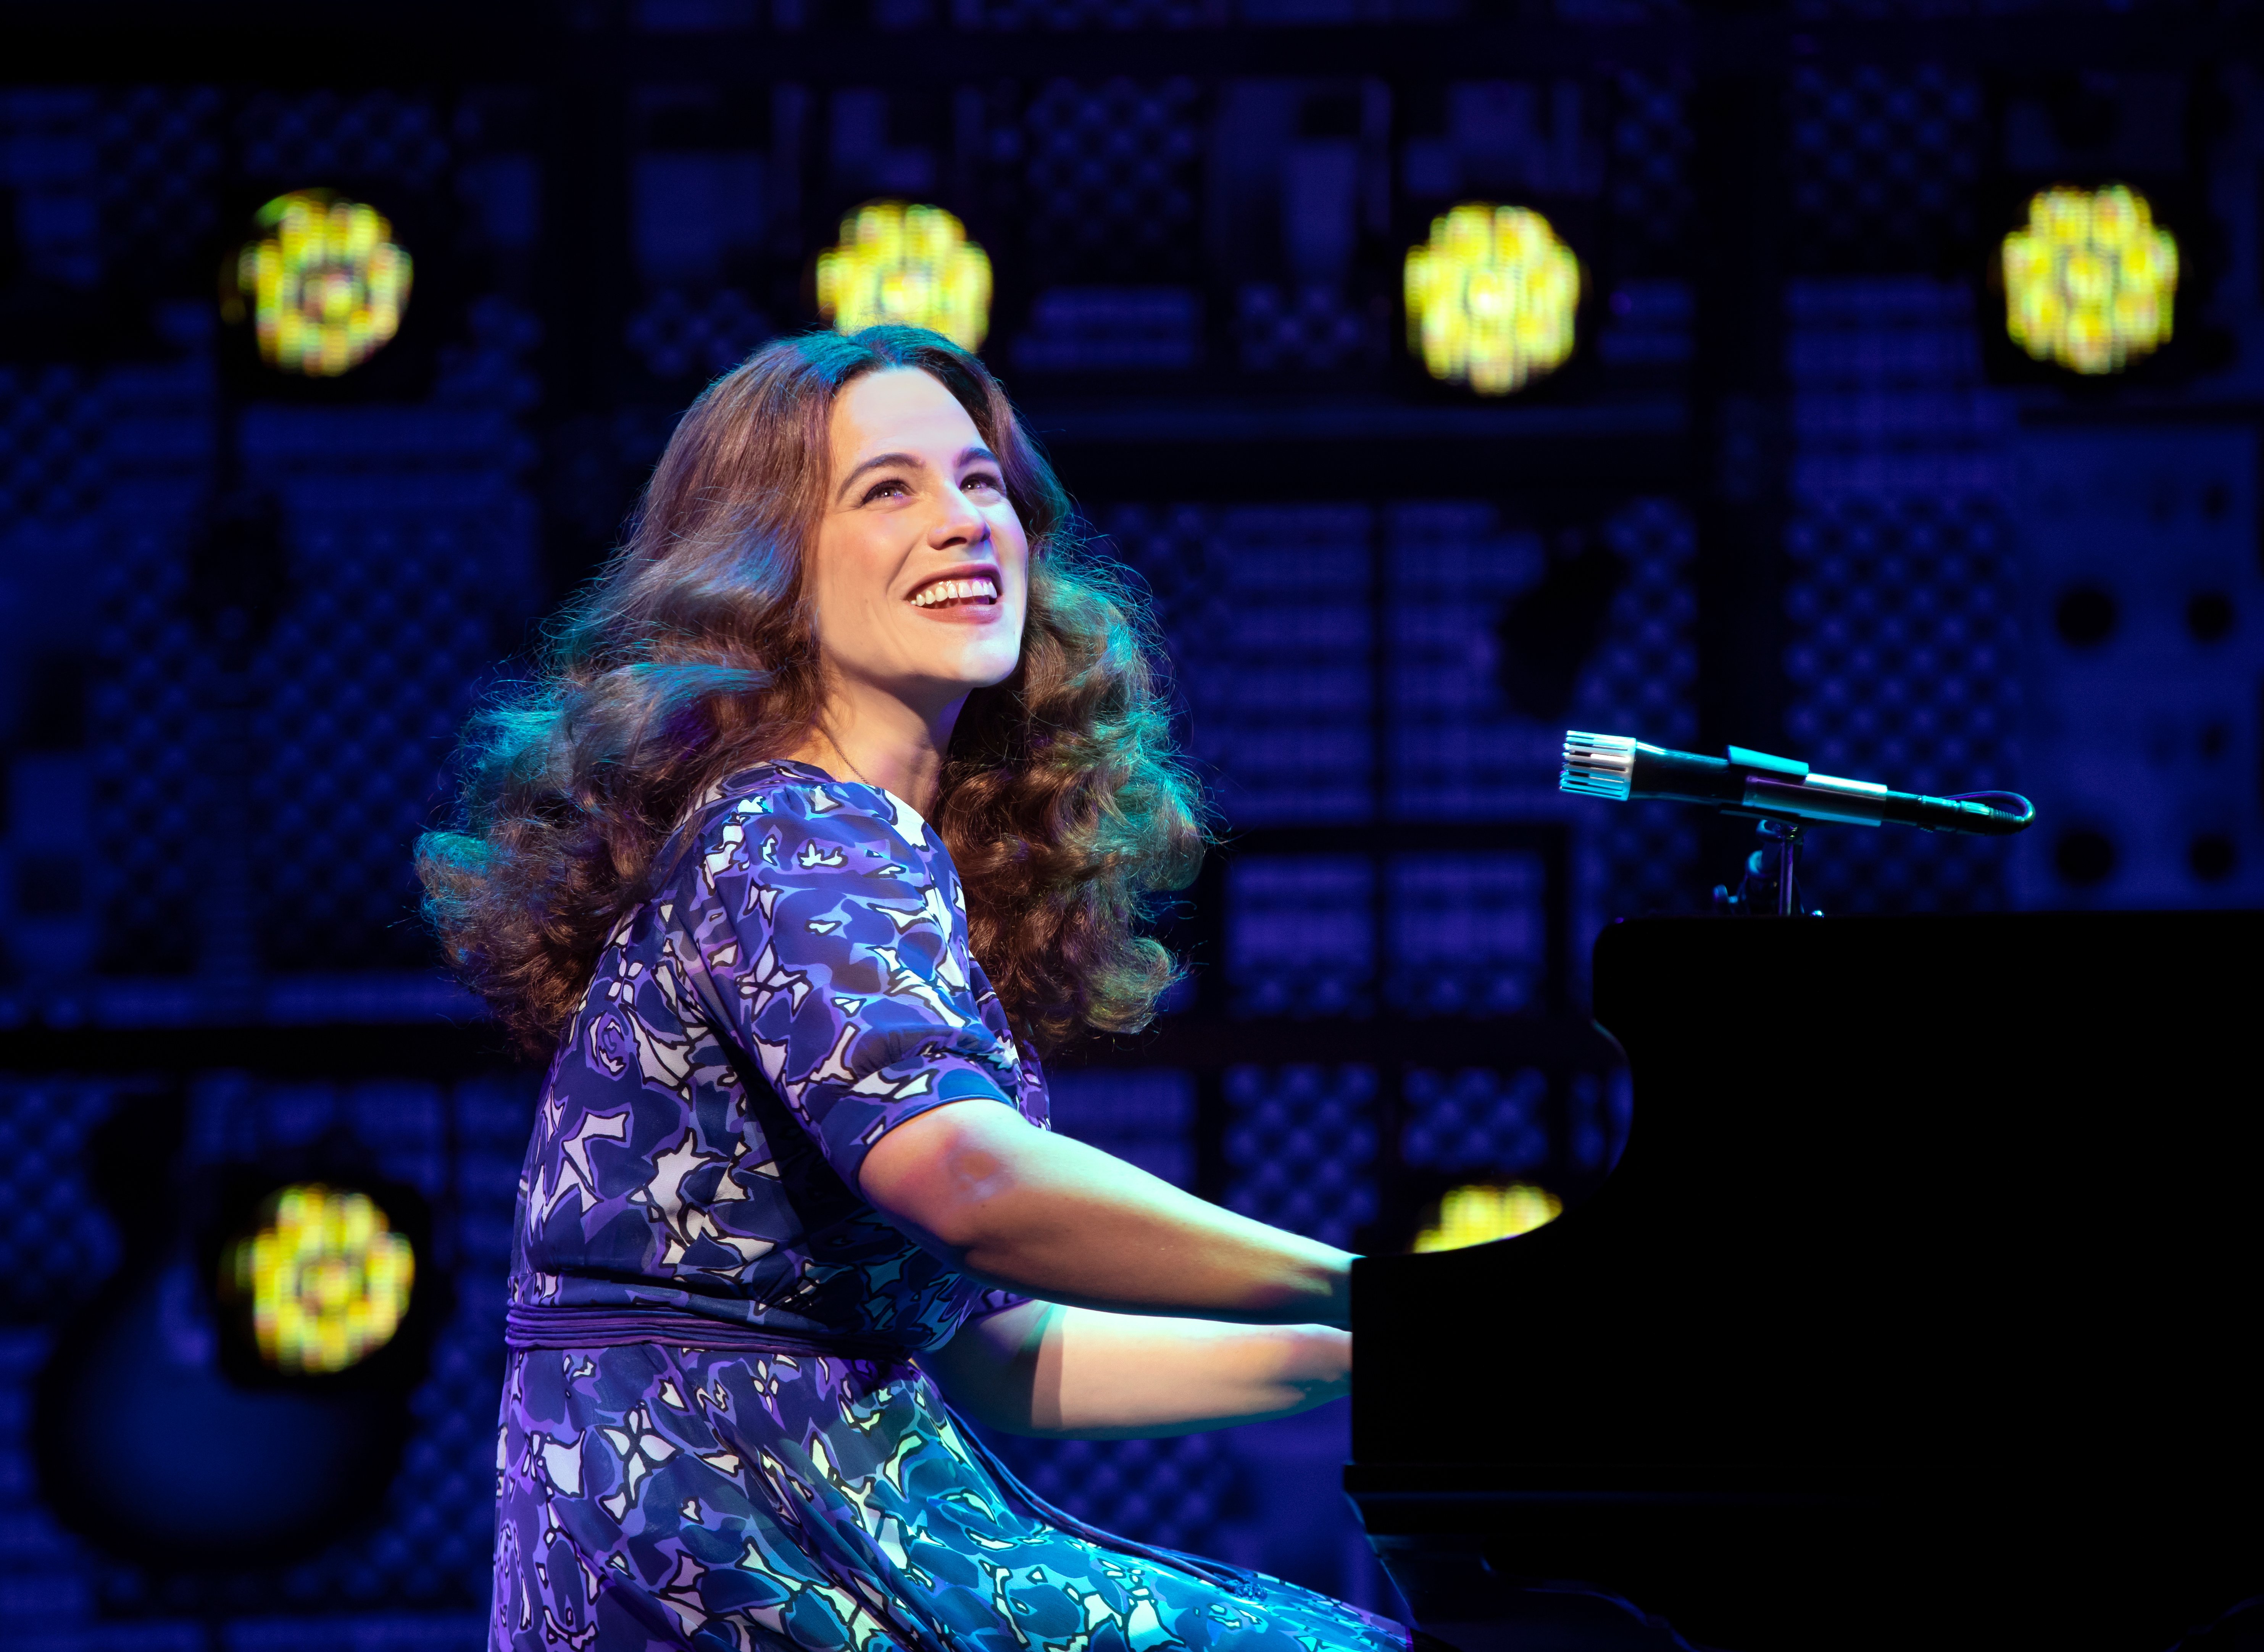 A 'Beautiful' look at the life of Carole King